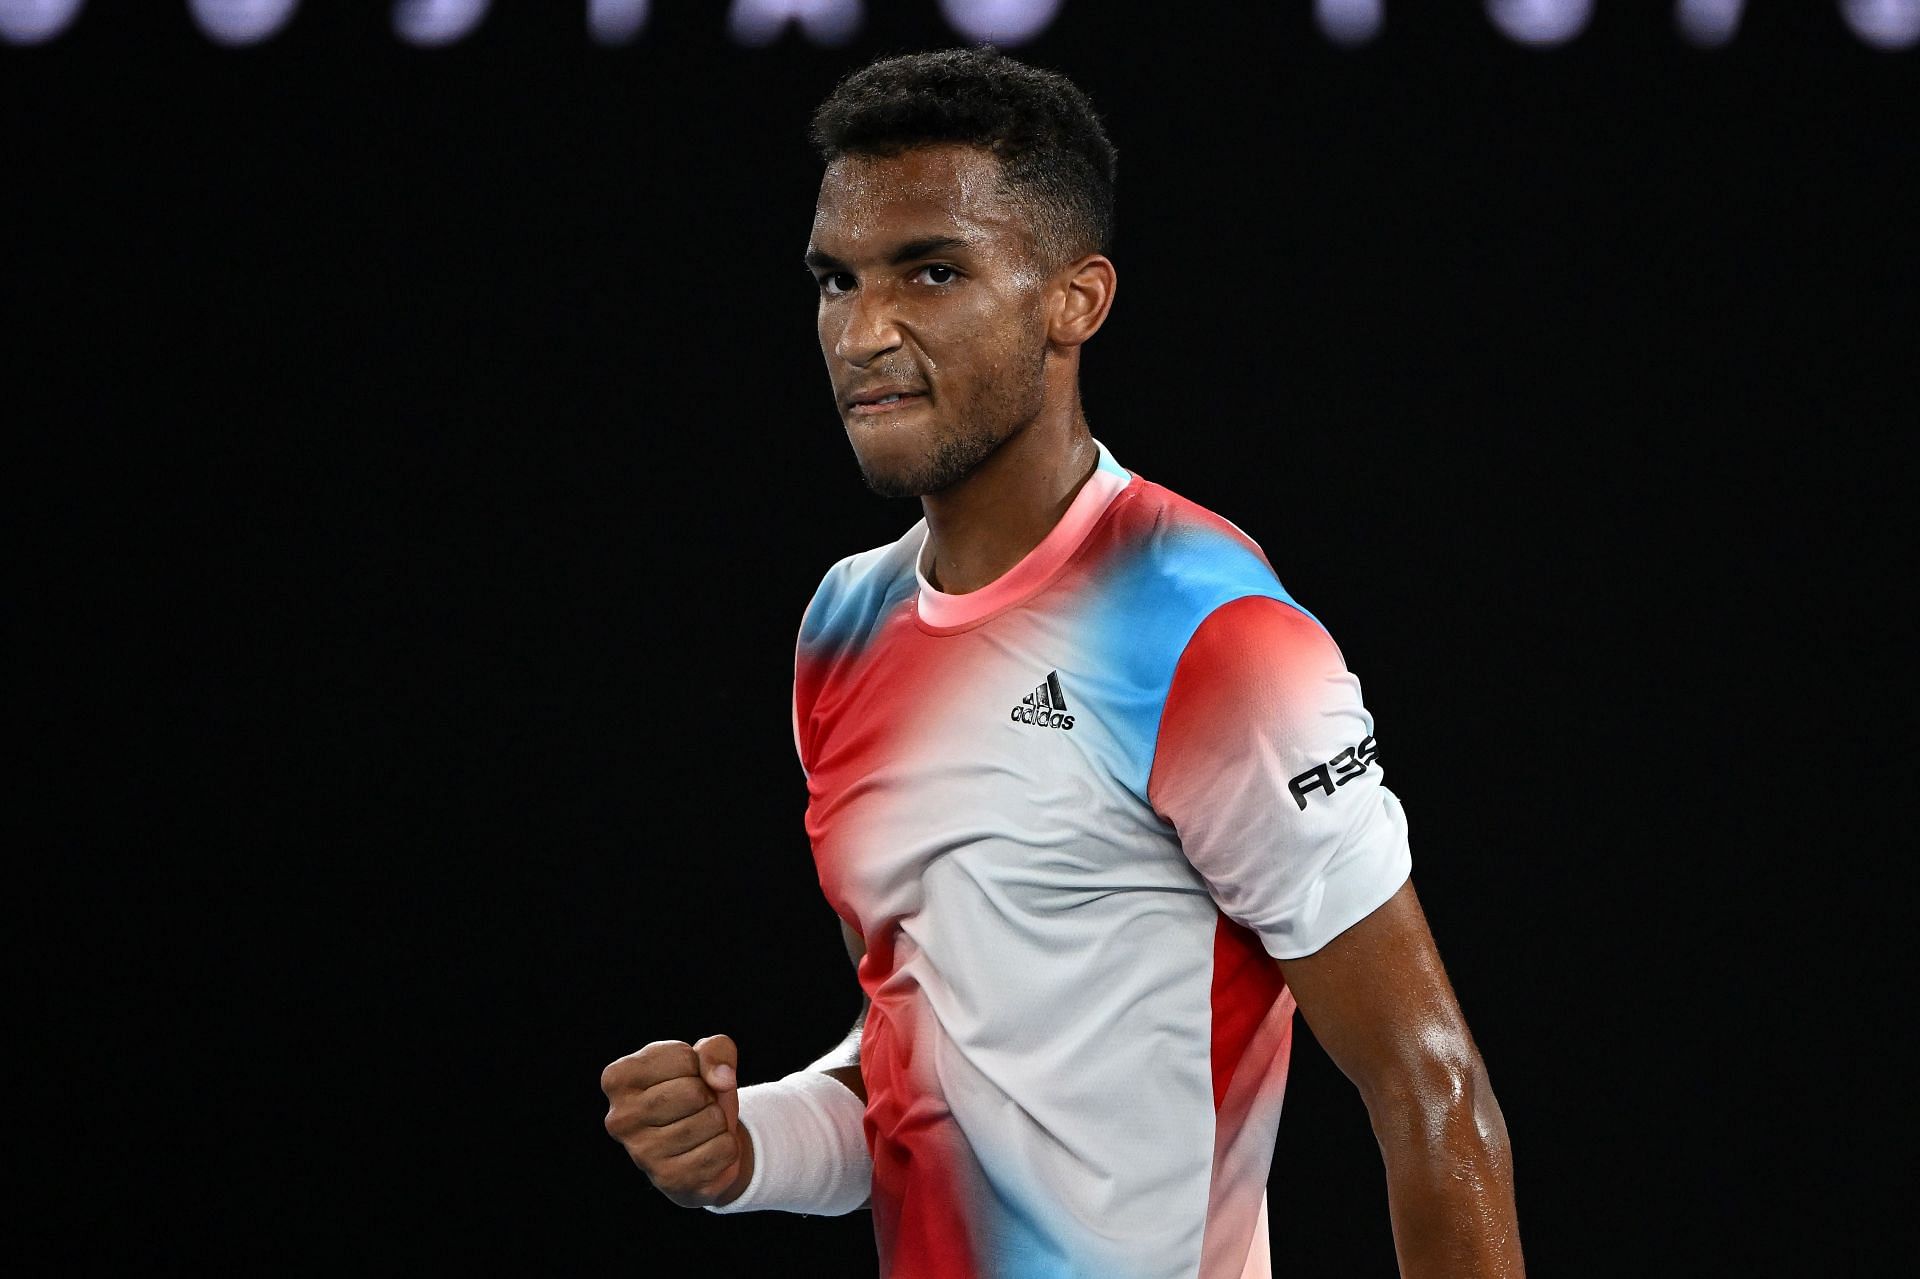 Felix Auger-Aliassime is one of the favorites to win the title.